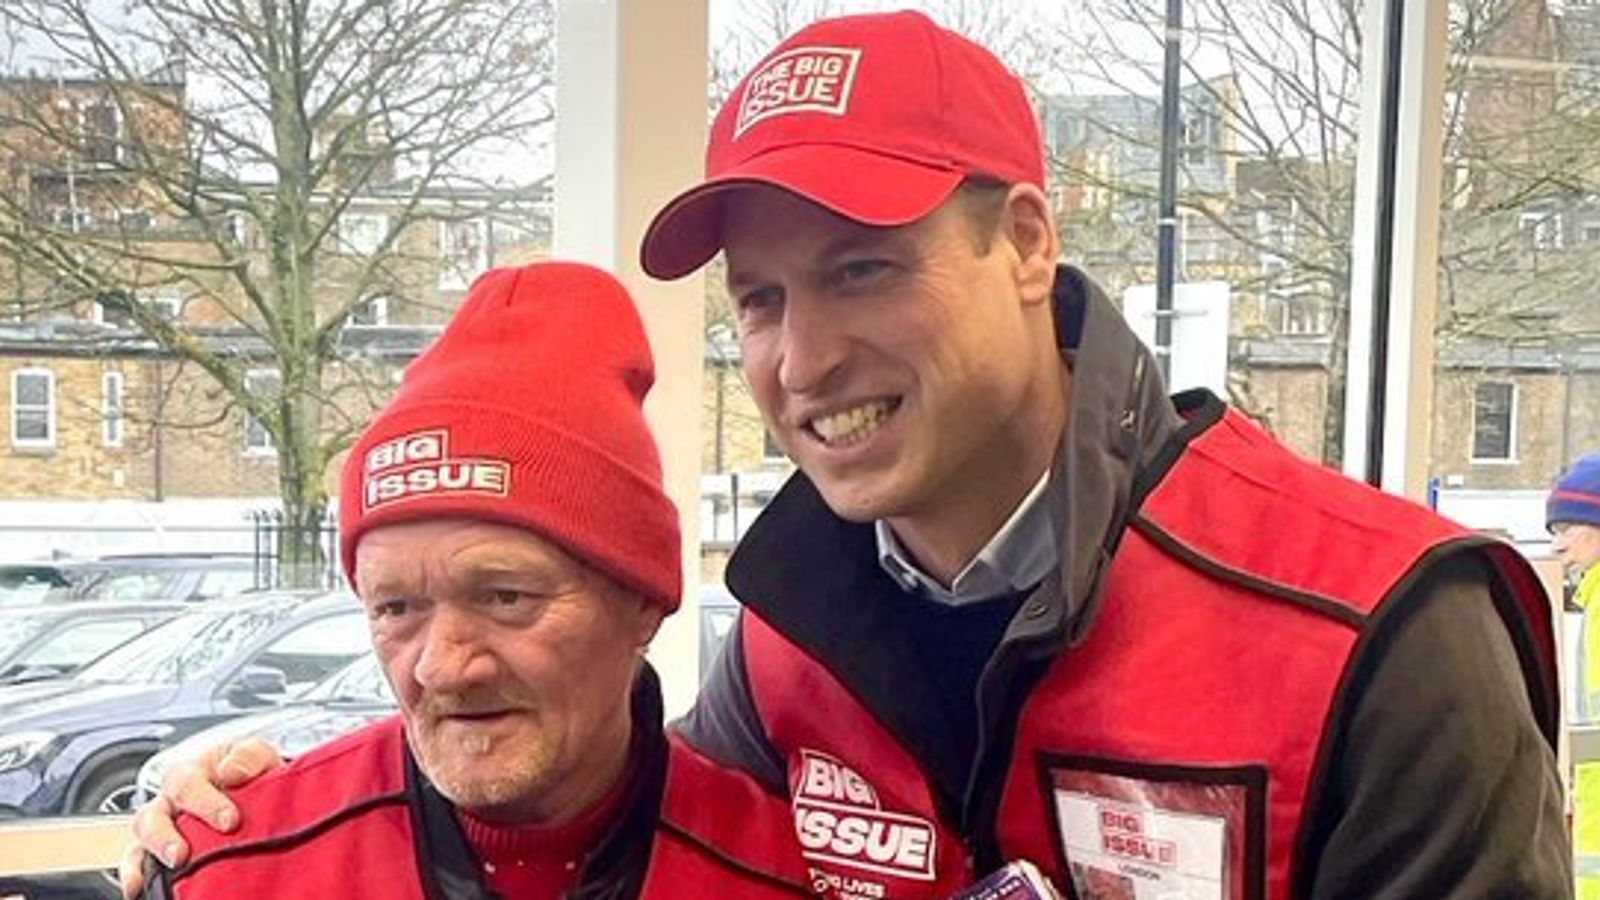 Prince William helps sell The Big Issue for second year running